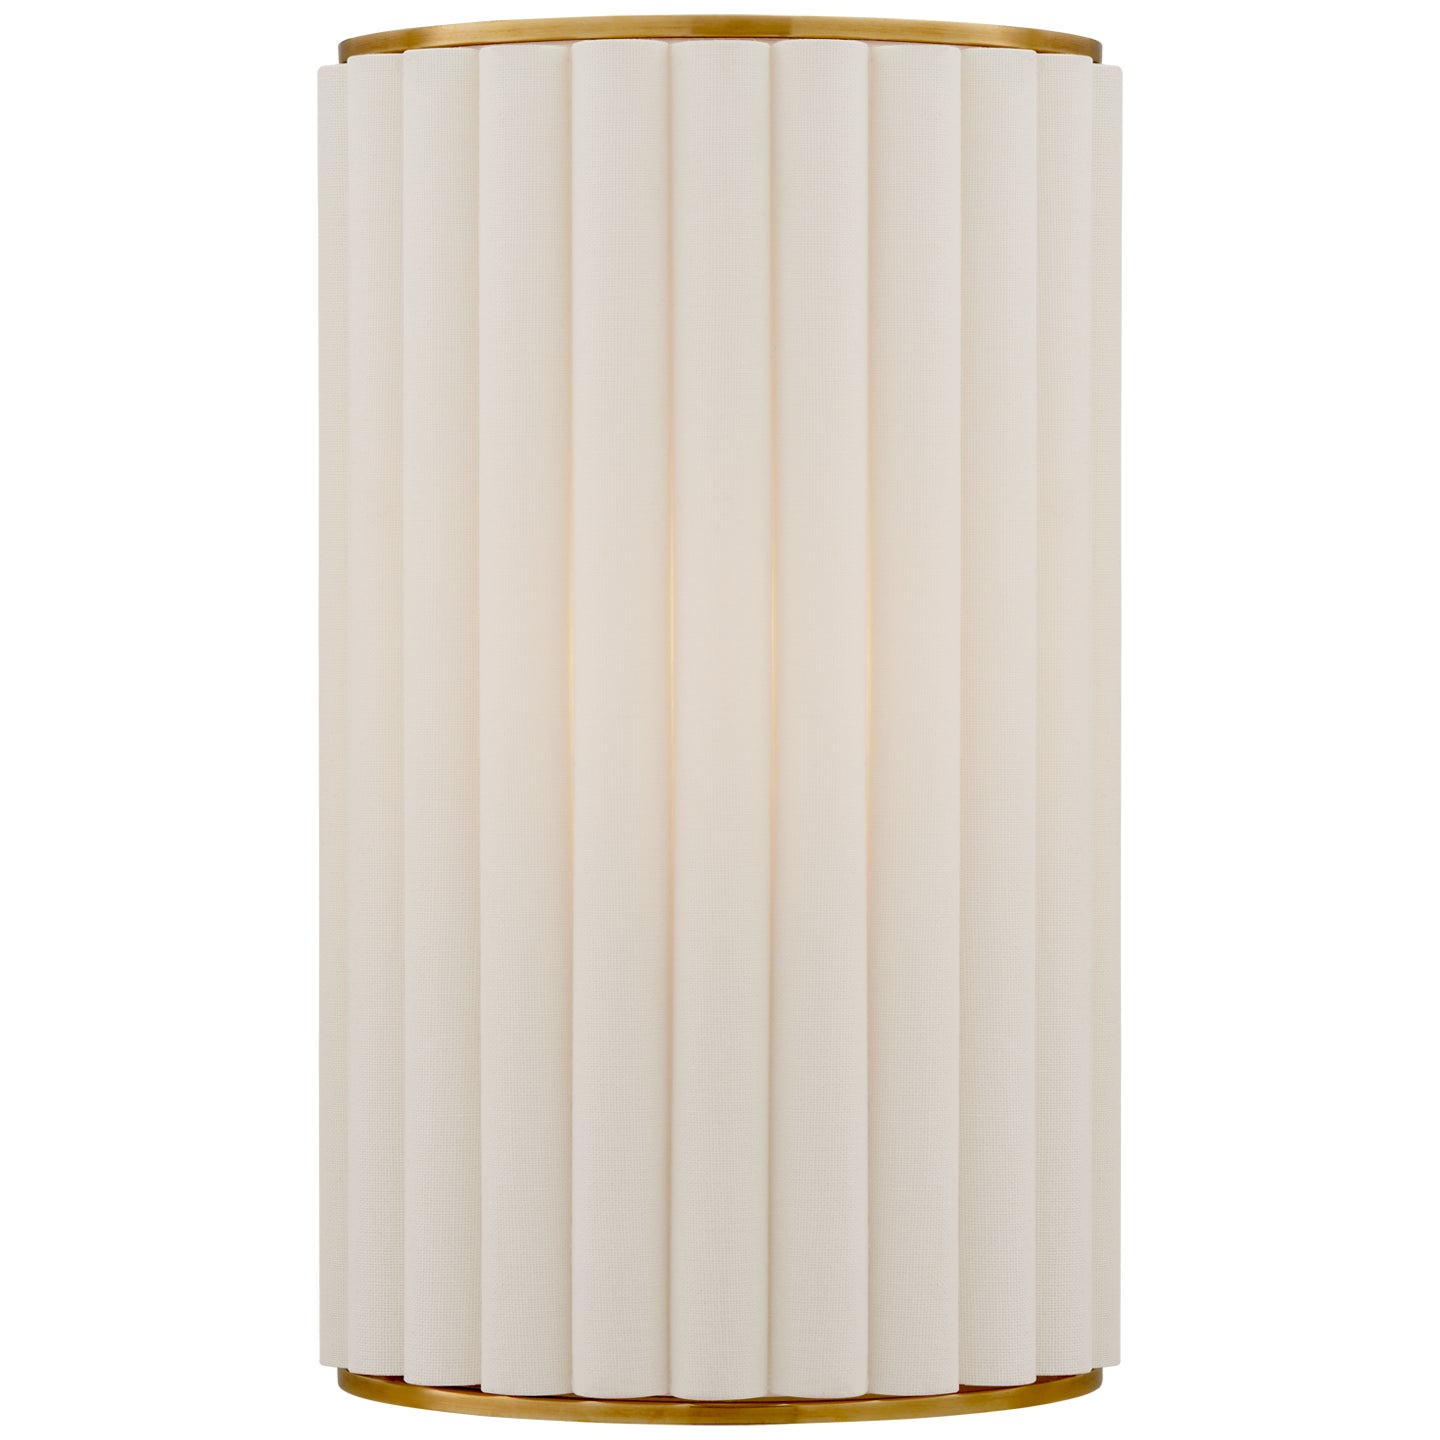 Visual Comfort Signature - S 2440HAB-L - One Light Wall Sconce - Palati - Hand-Rubbed Antique Brass